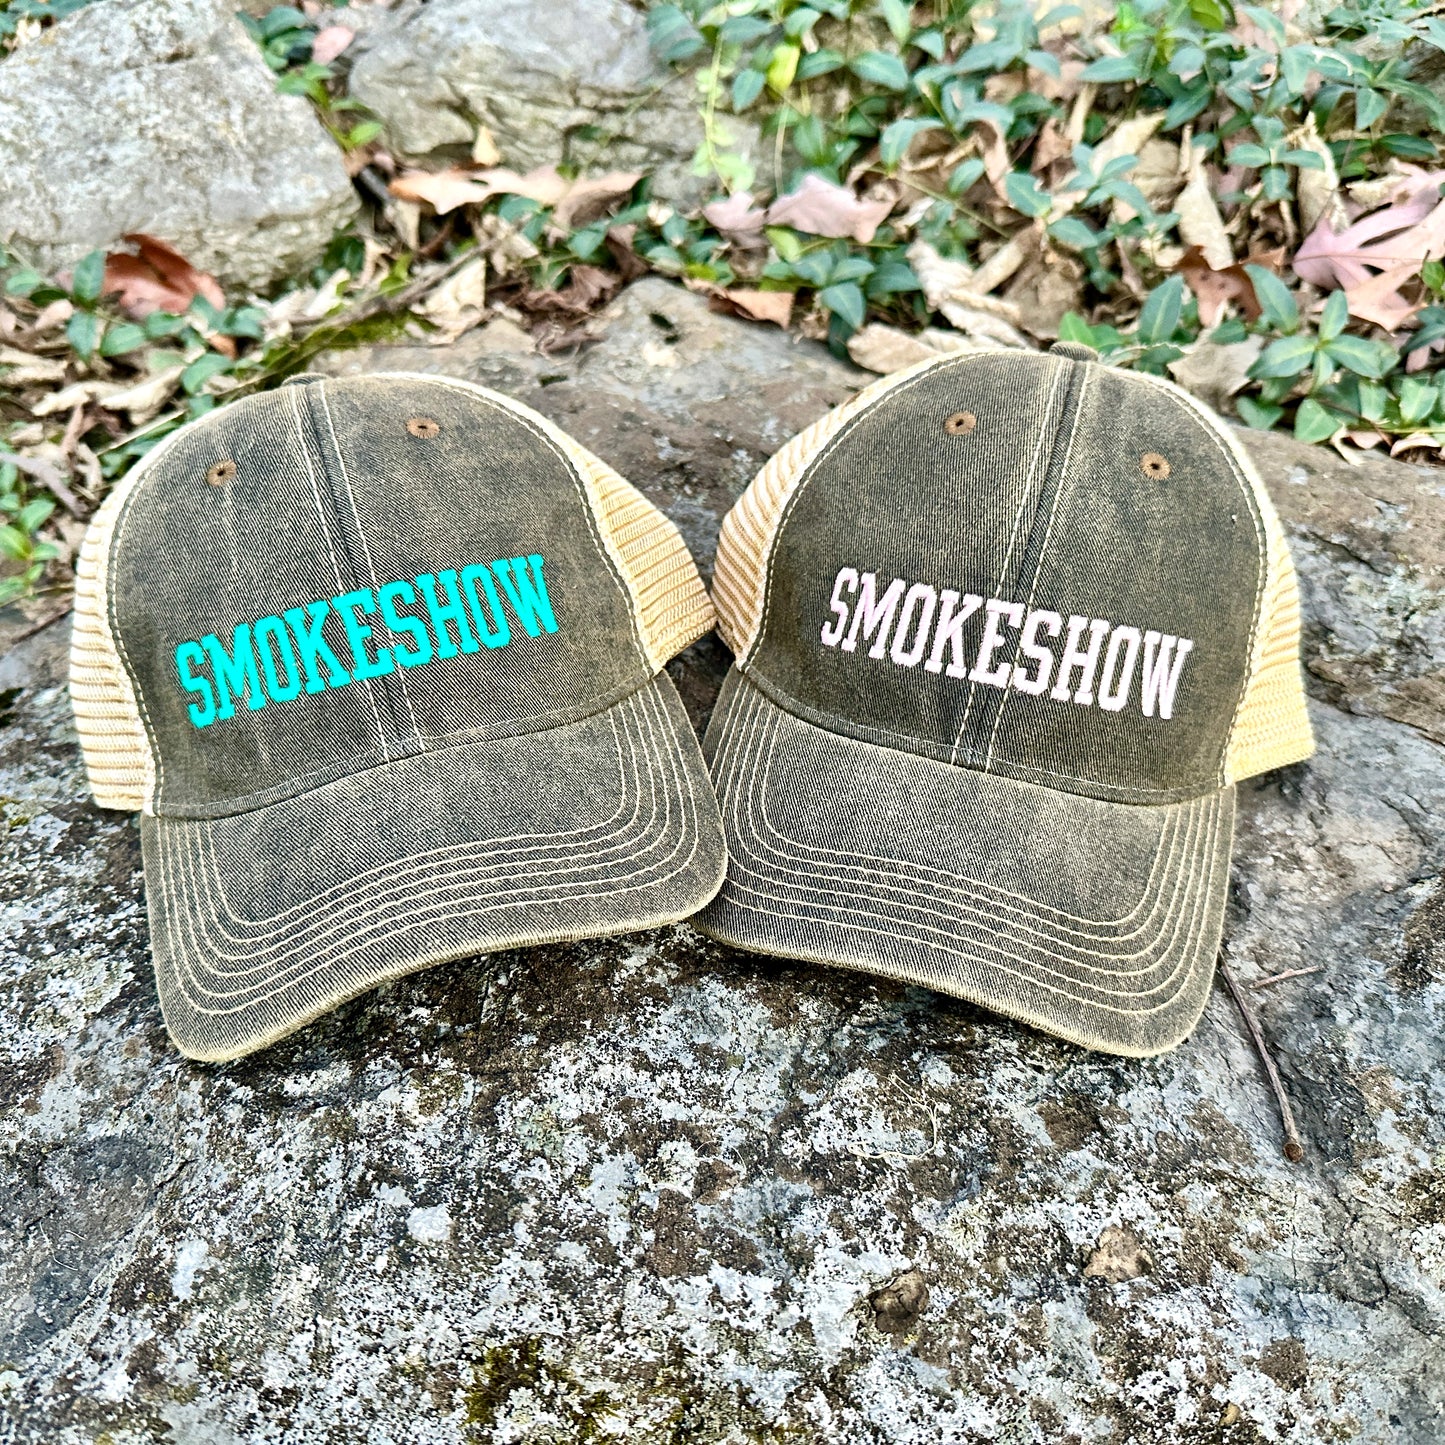 Smokeshow Trucker Hat Distressed Black Embroidered Pink or Aqua